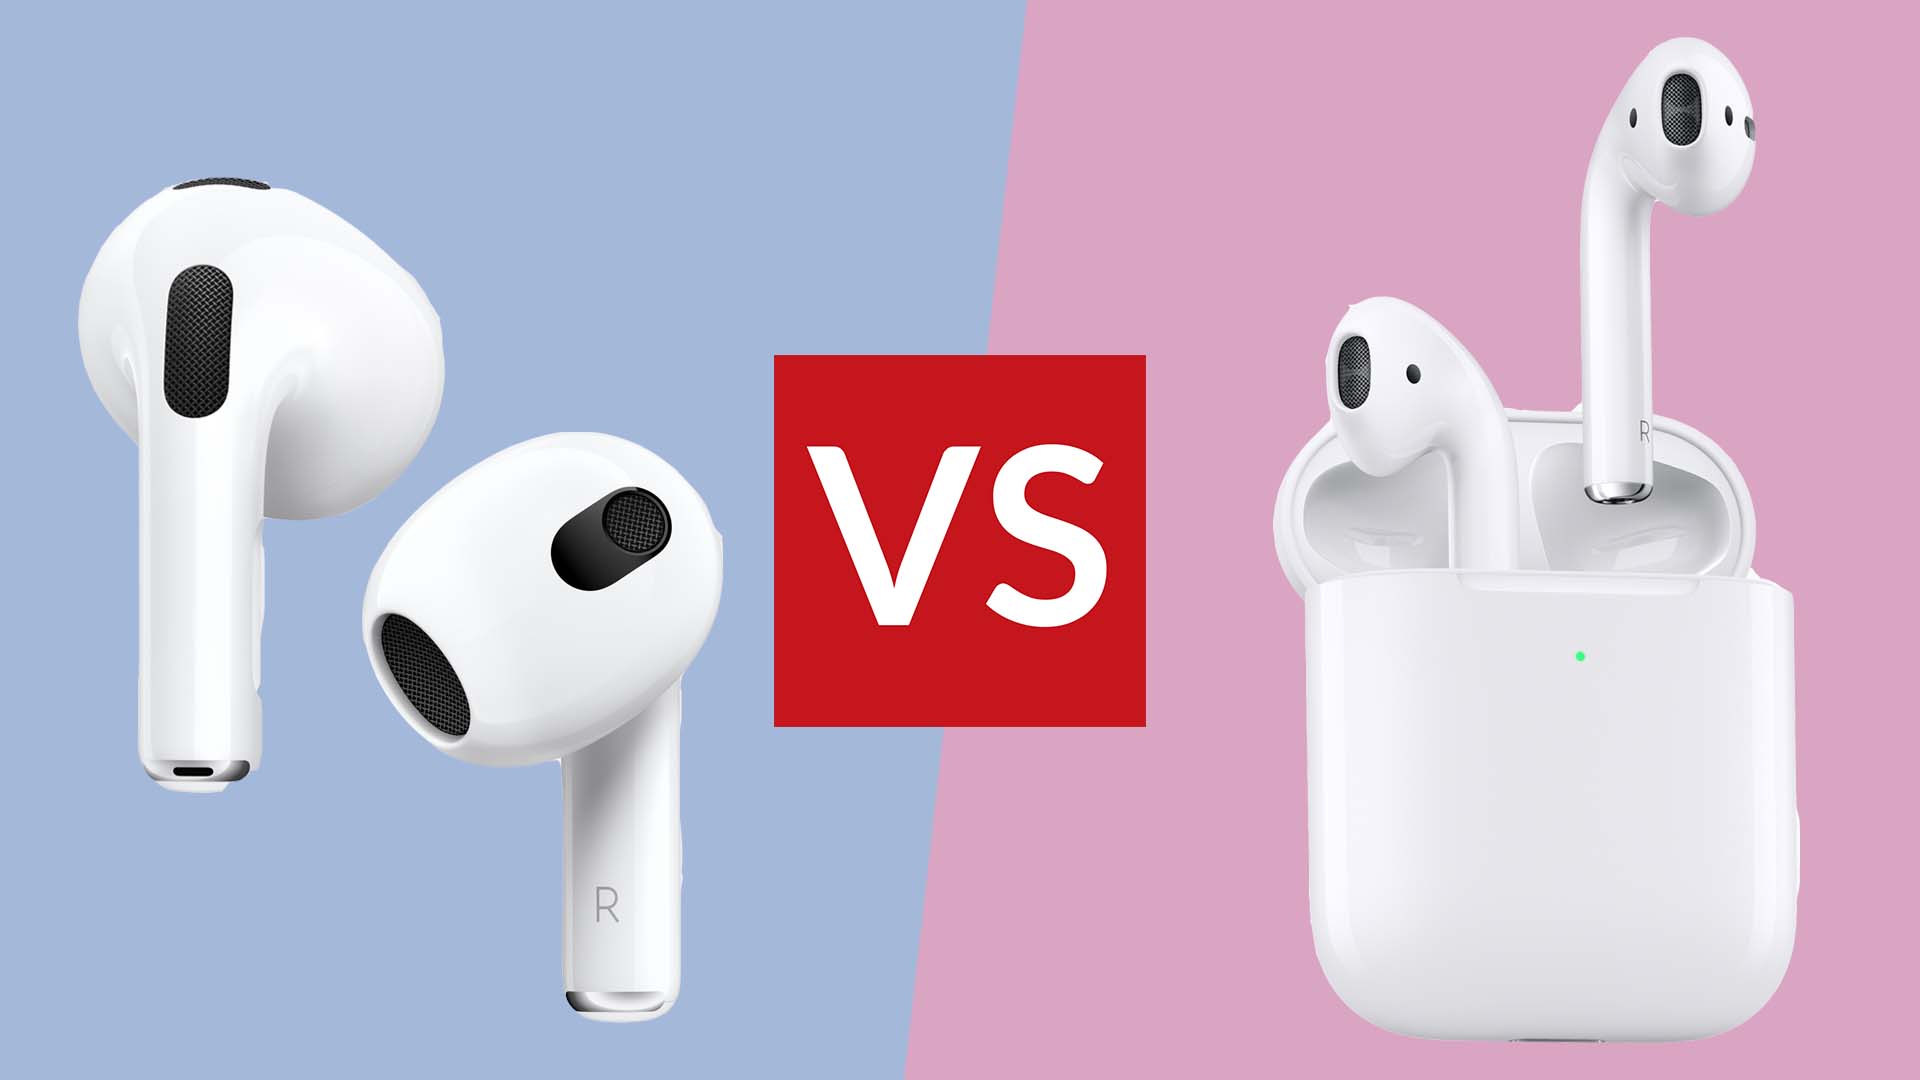 AirPods 3 review: An excellent AirPods evolution, but fit can be